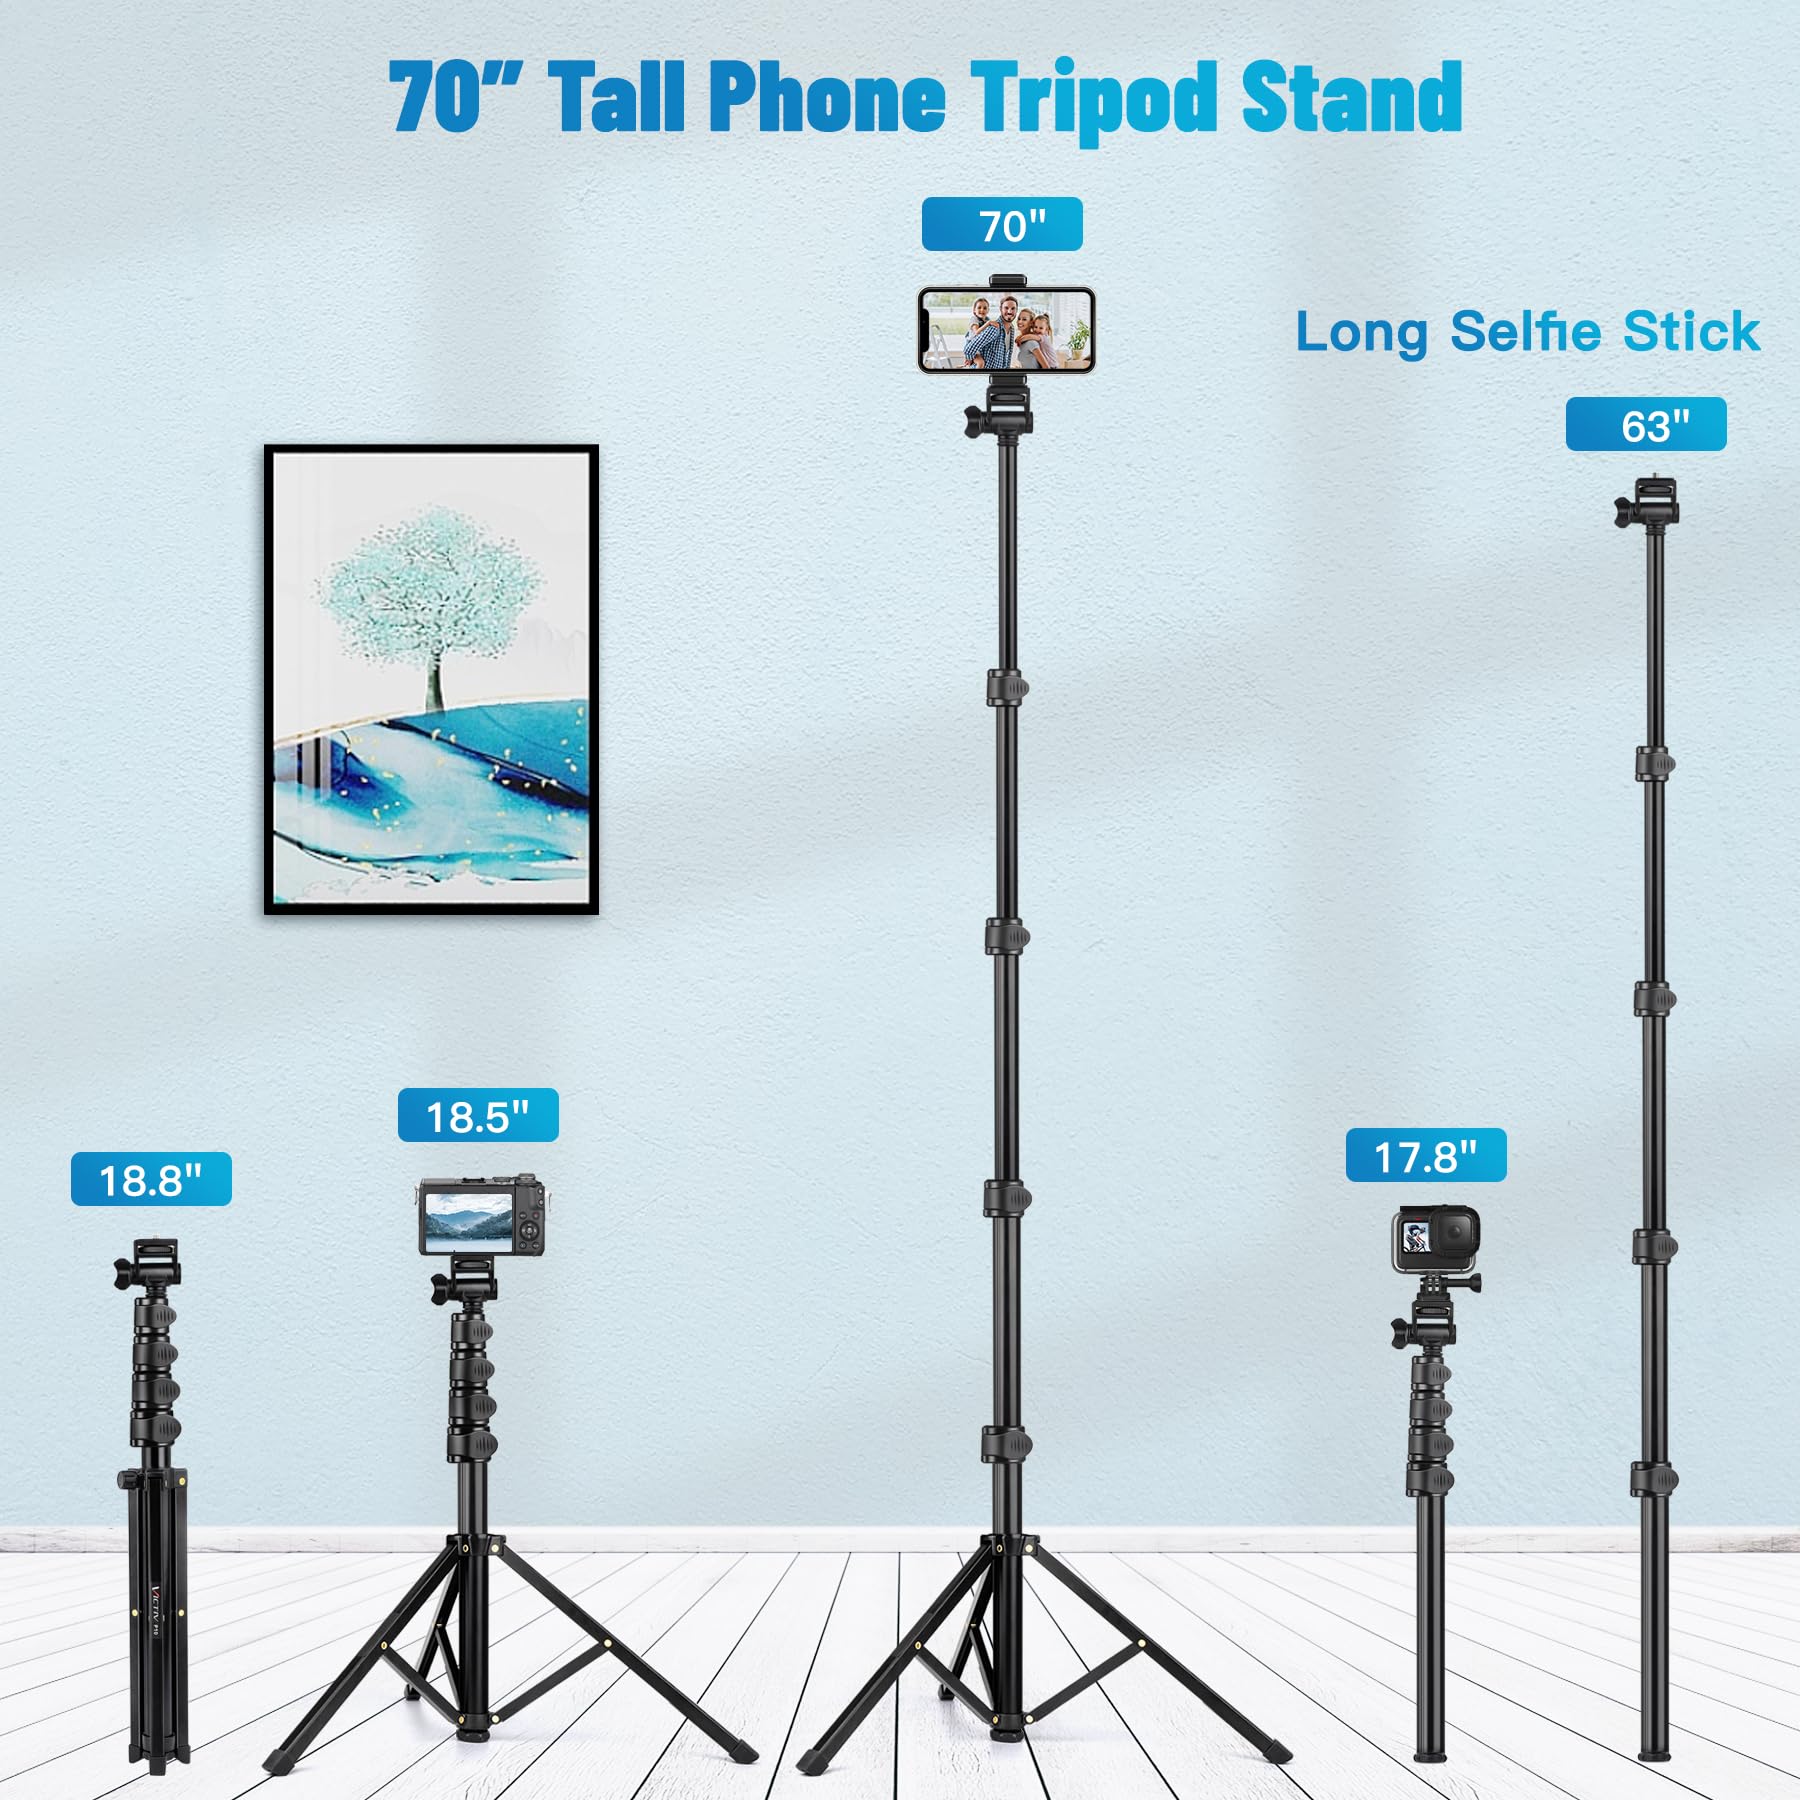 Phone Tripod, 70" Tripod Stand for Phone & Camera, Phone Tripod Stand with Remote and Phone Holder, Cell Phone Tripod for Recording/Vlogging/Live Streaming, Compatible with iPhone & GoPro